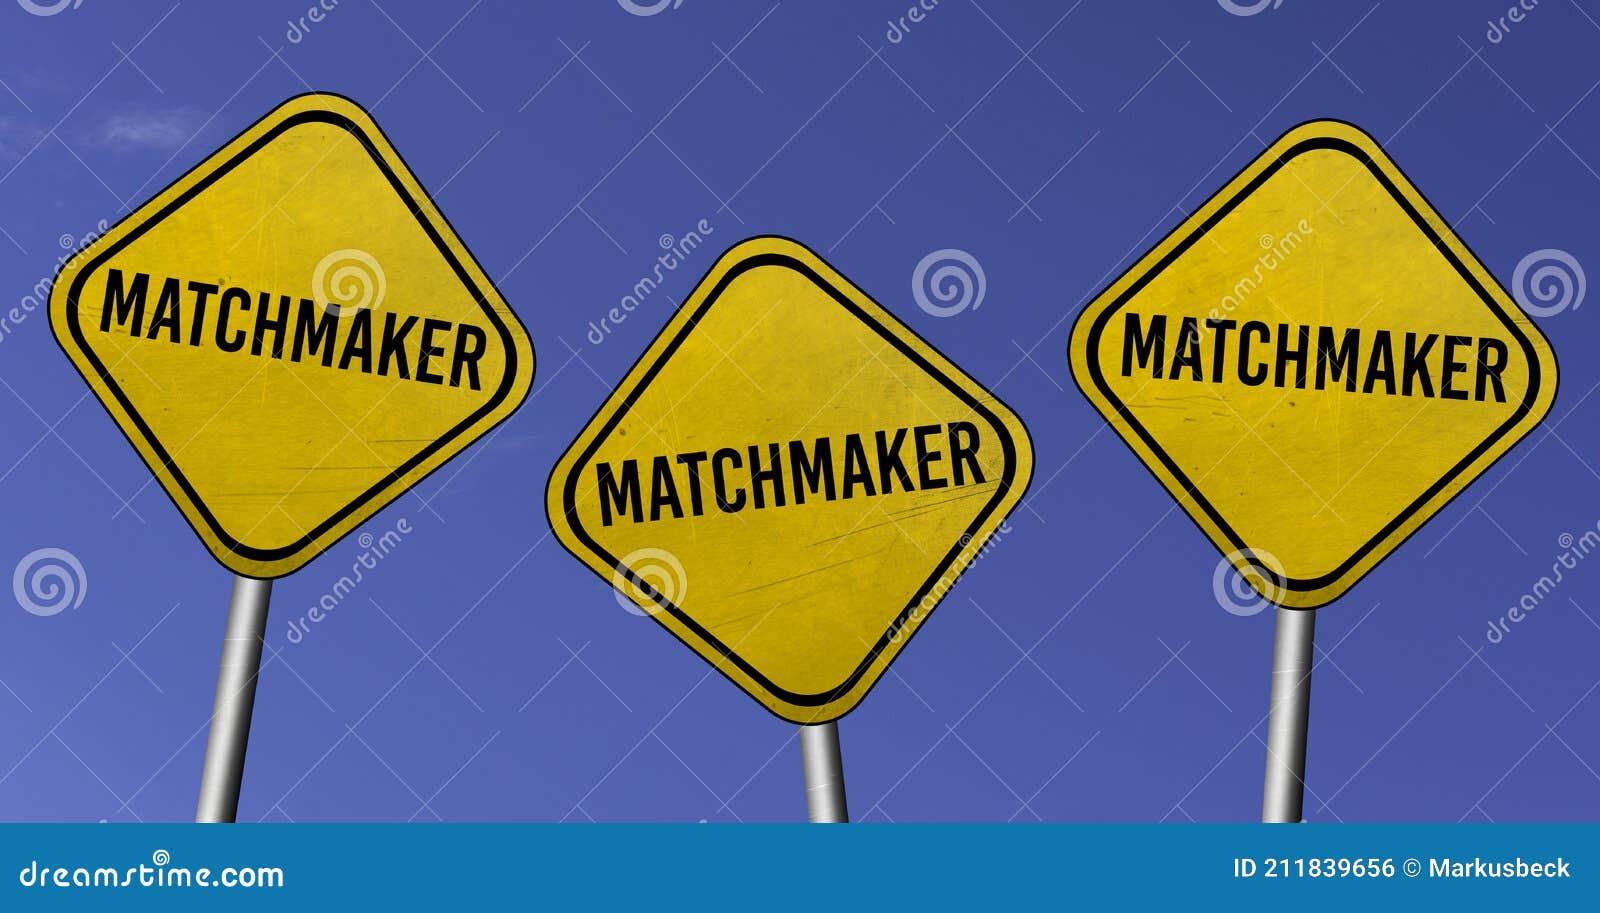 Matchmaker Going to